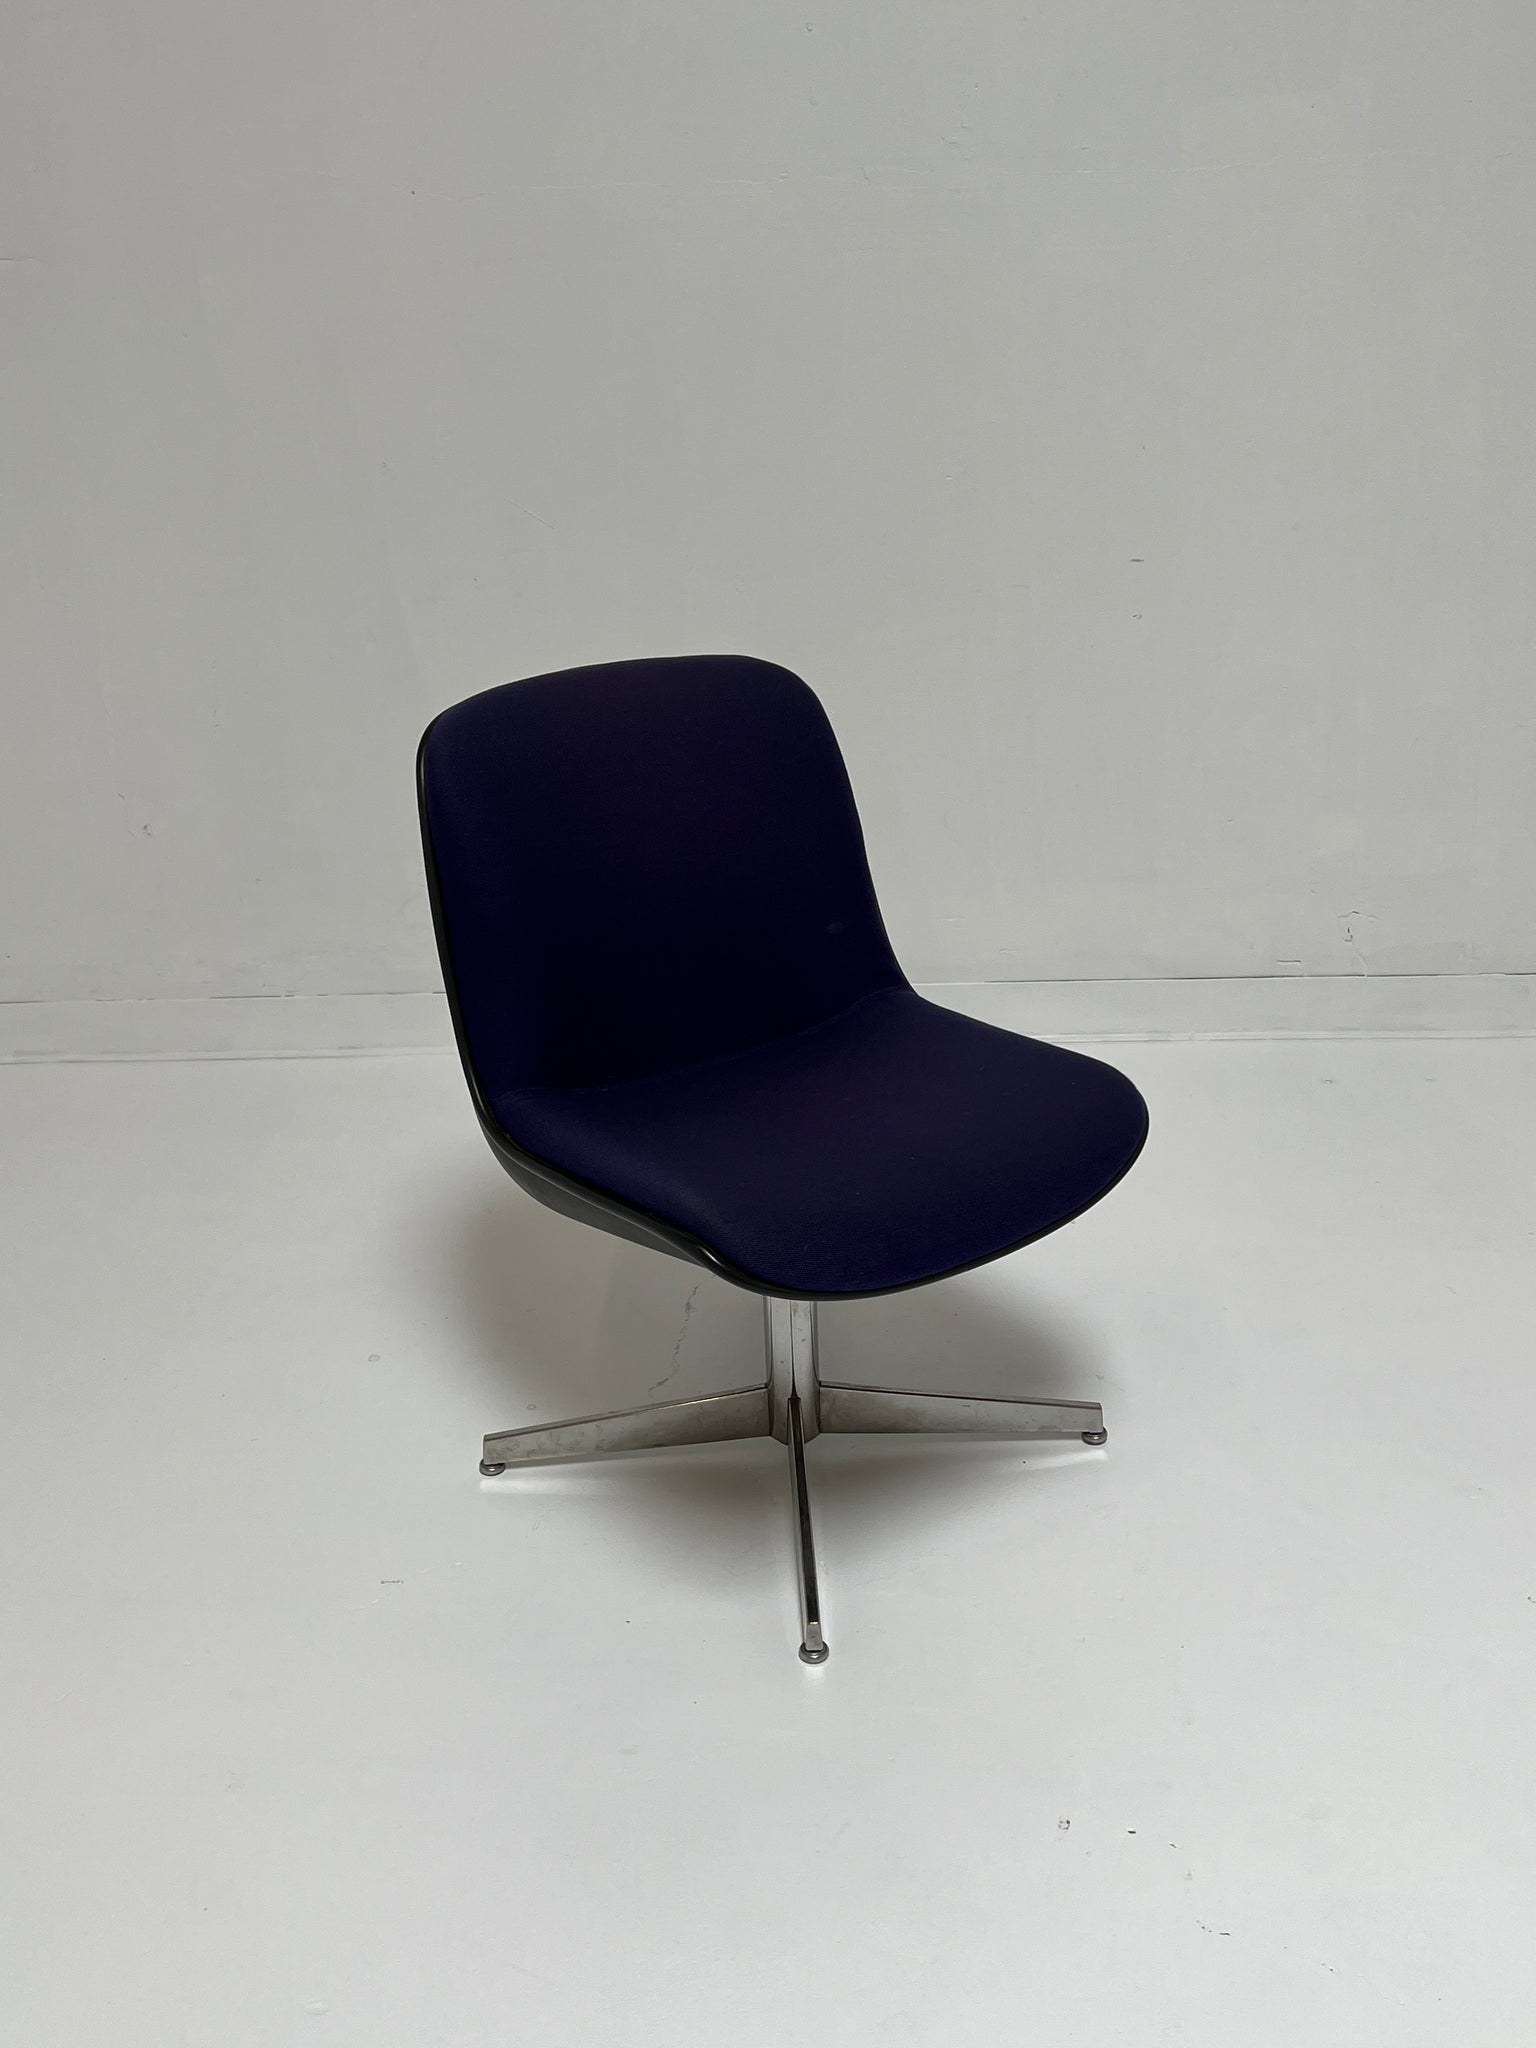 1980s Steelcase Chair